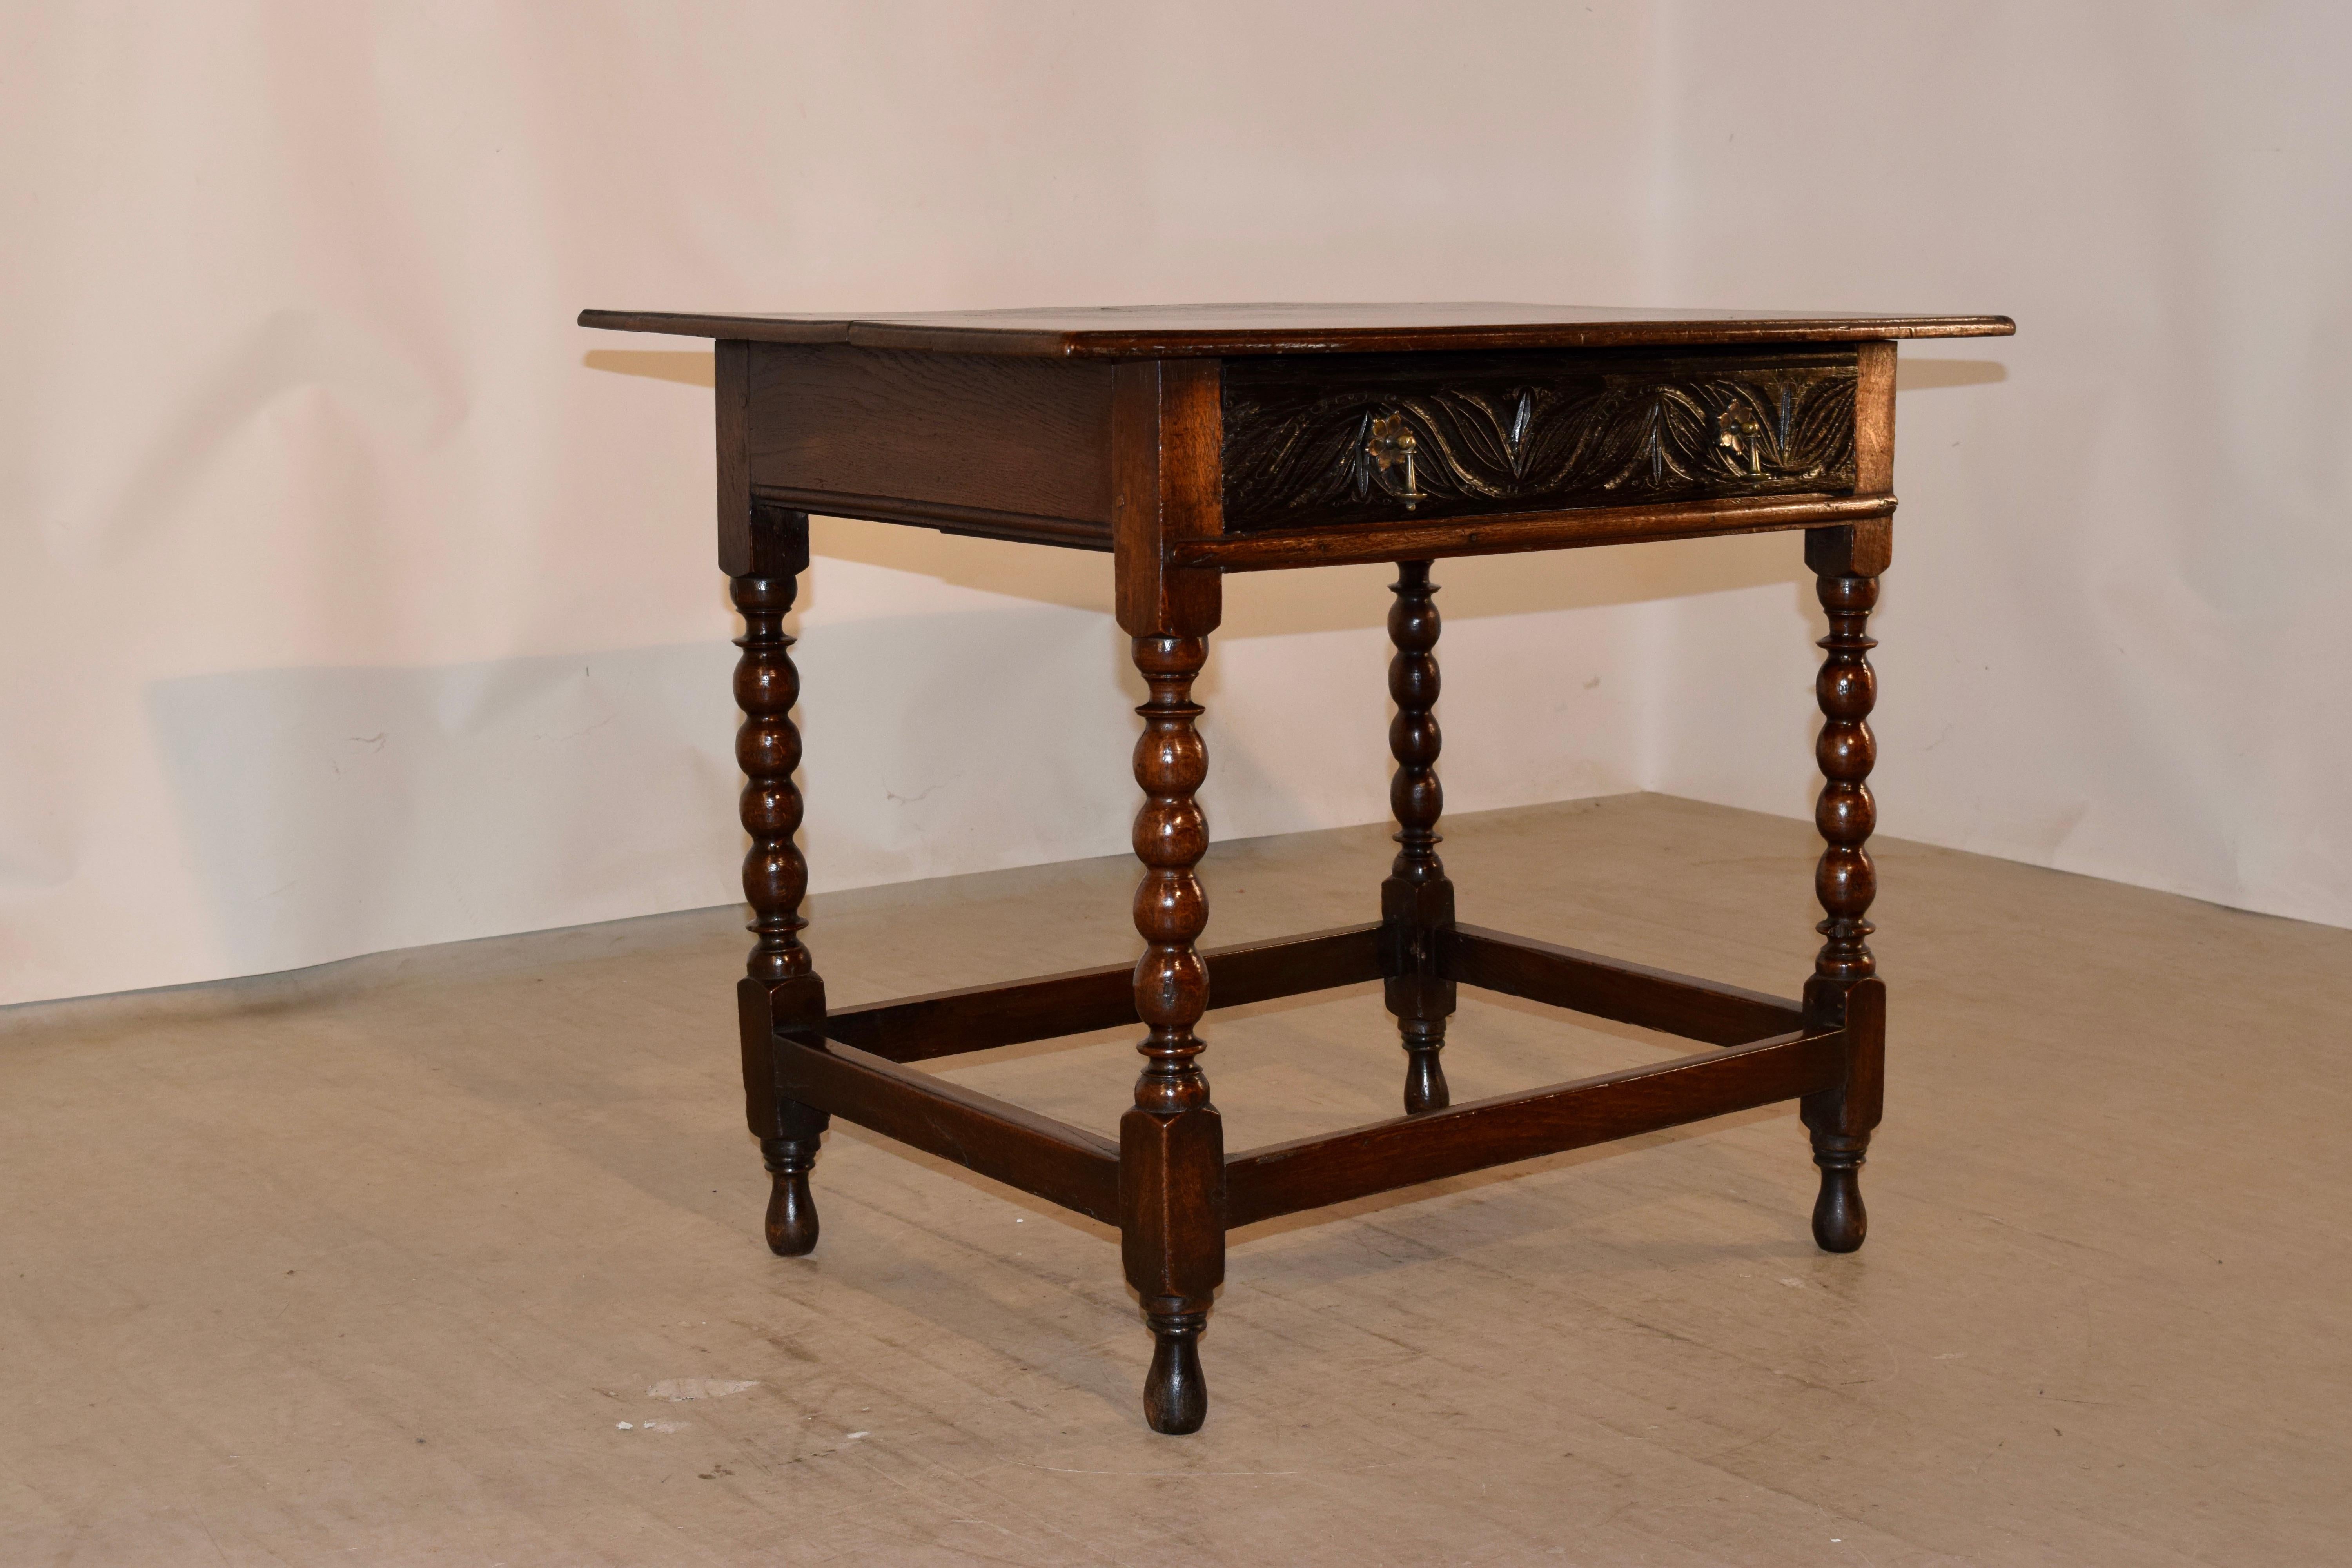 18th century English side table made from oak. The top has a beveled edge around the top, which has lovely graining detail. This follows down to simple sides and a single drawer with a carved decorated drawer front and hand-turned bobbin shaped